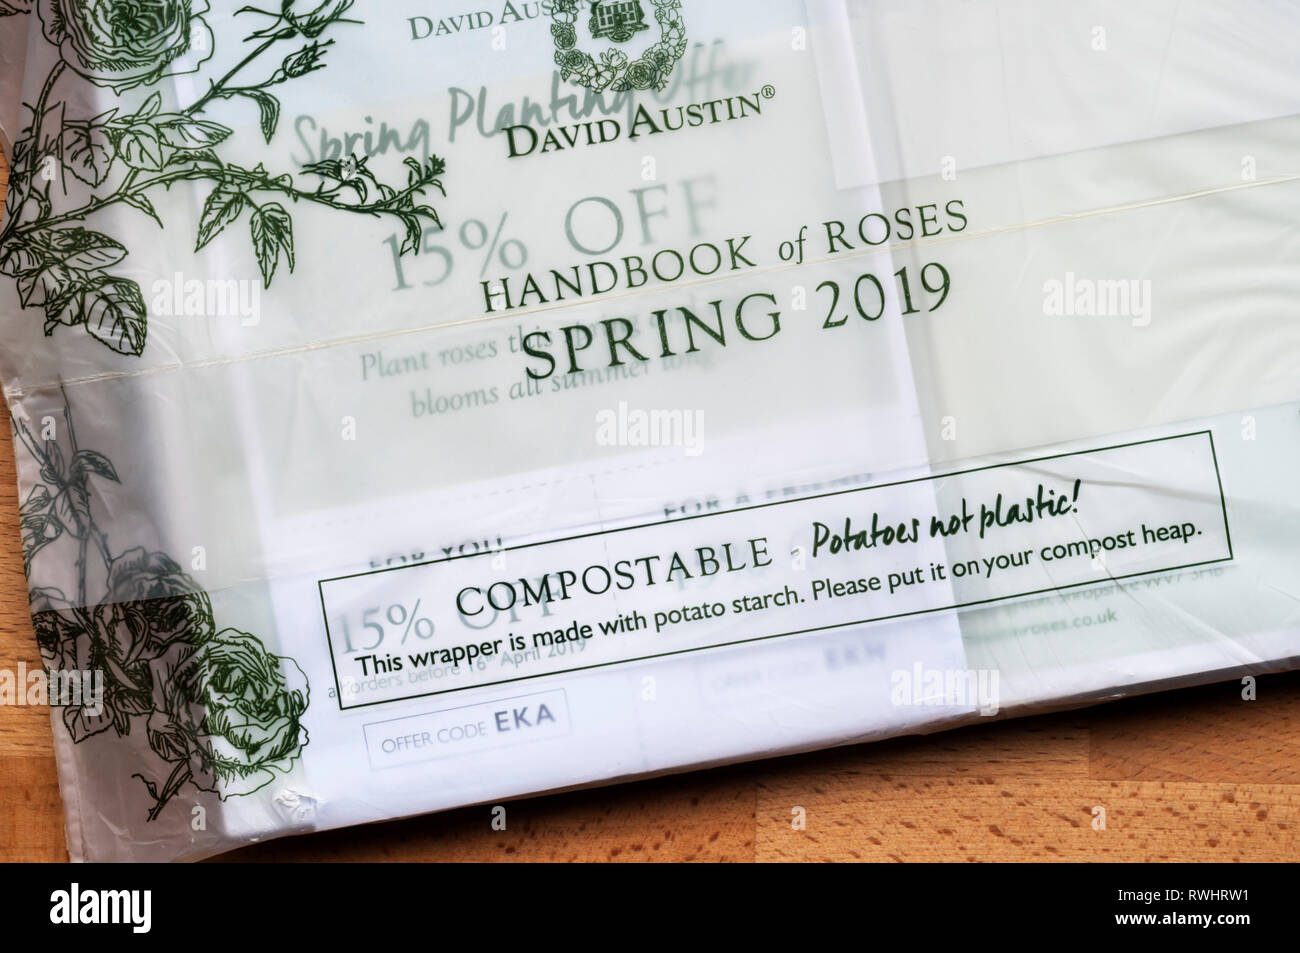 Compostable bag for David Austin roses catalogue.  Made from biodegradable potato starch to reduce plastic pollution. Stock Photo